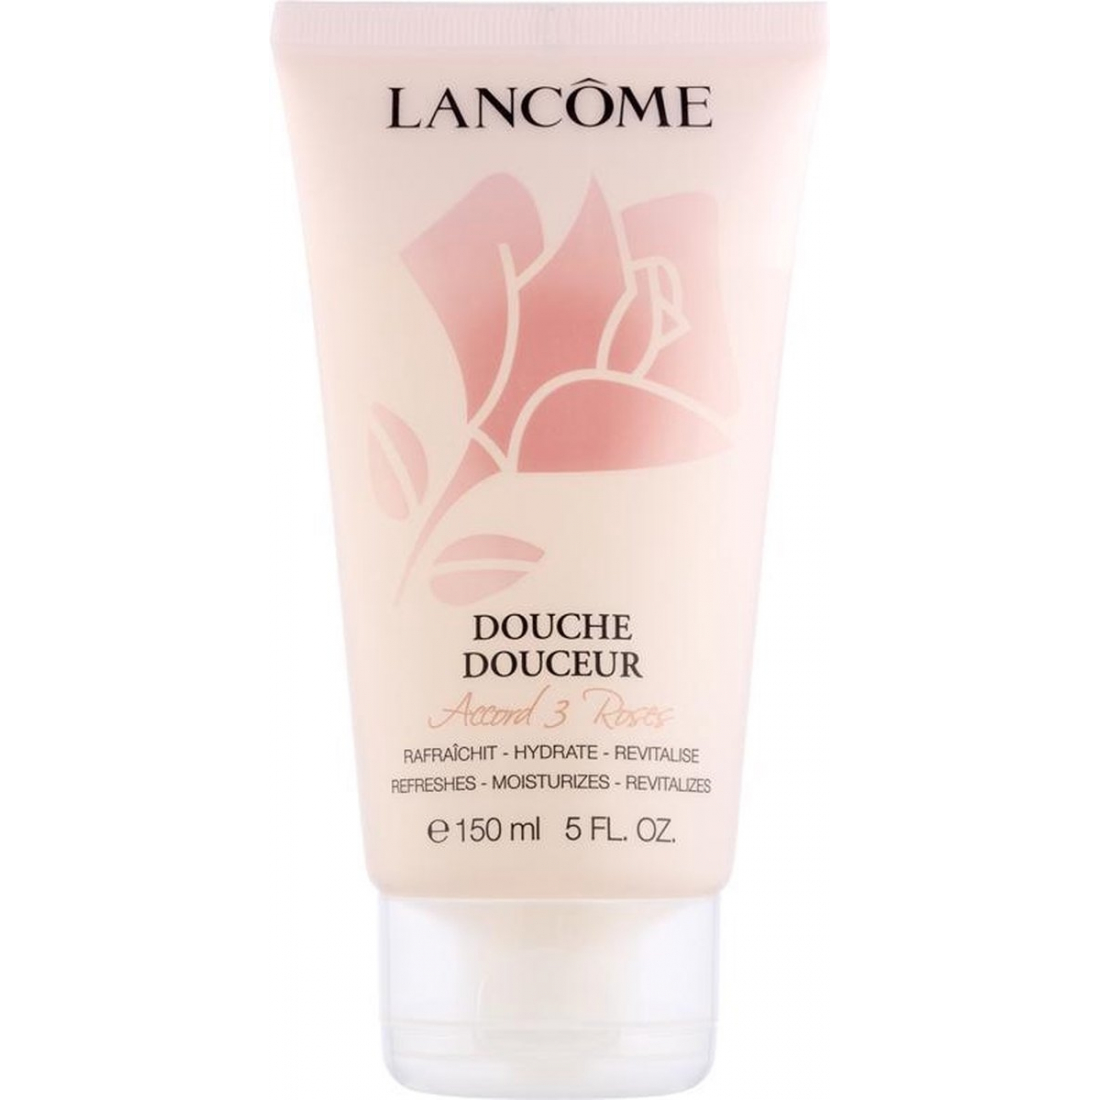 'Accord 3 Roses Douche Douceur' Shower Gel - 150 ml